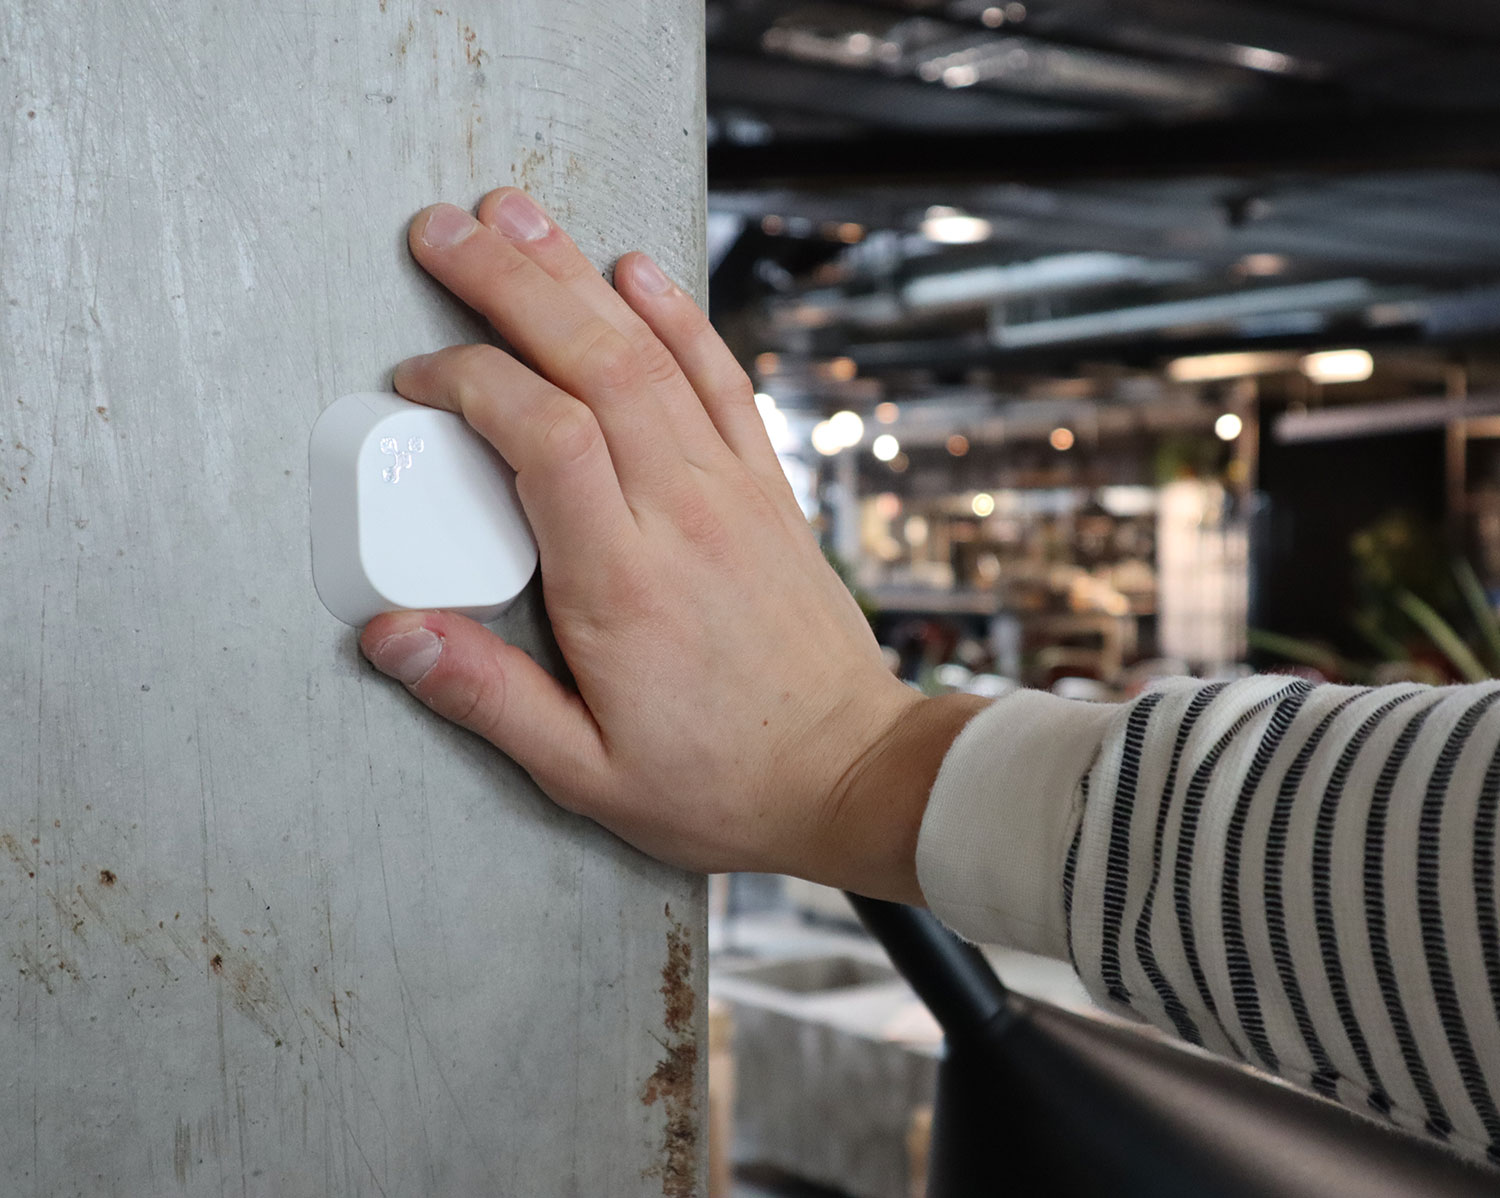 Installation of Bluetooth beacons for indoor positioning and indoor navigation